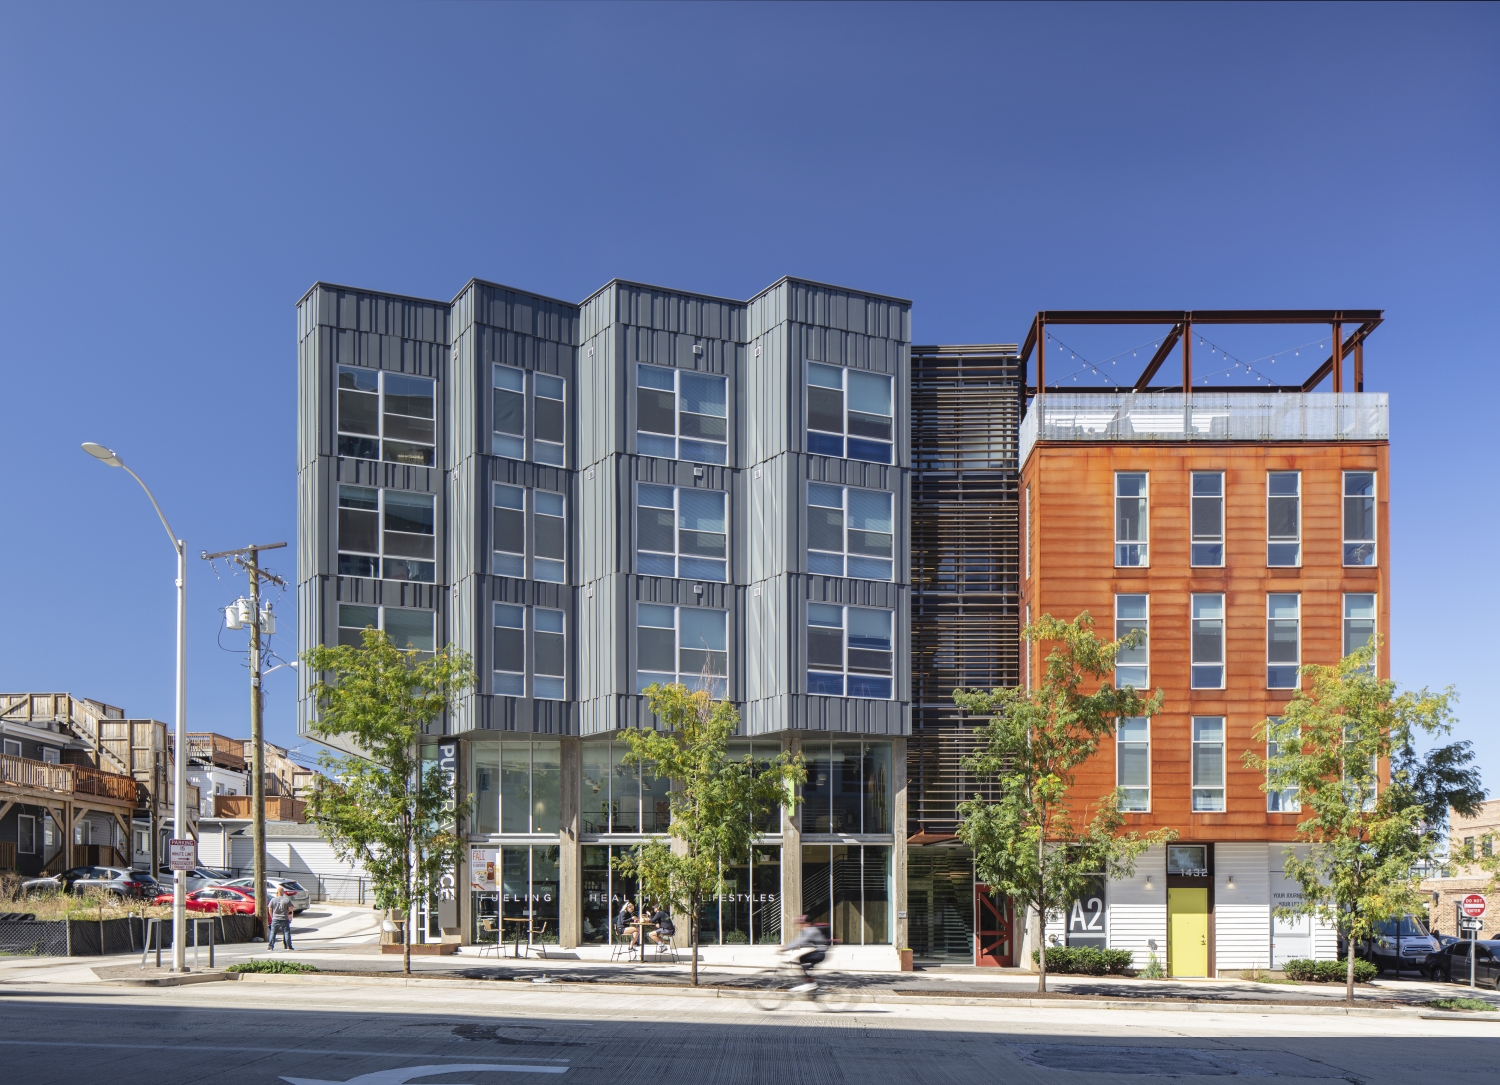 Exterior view of A2 Apartments in Baltimore, Maryland.